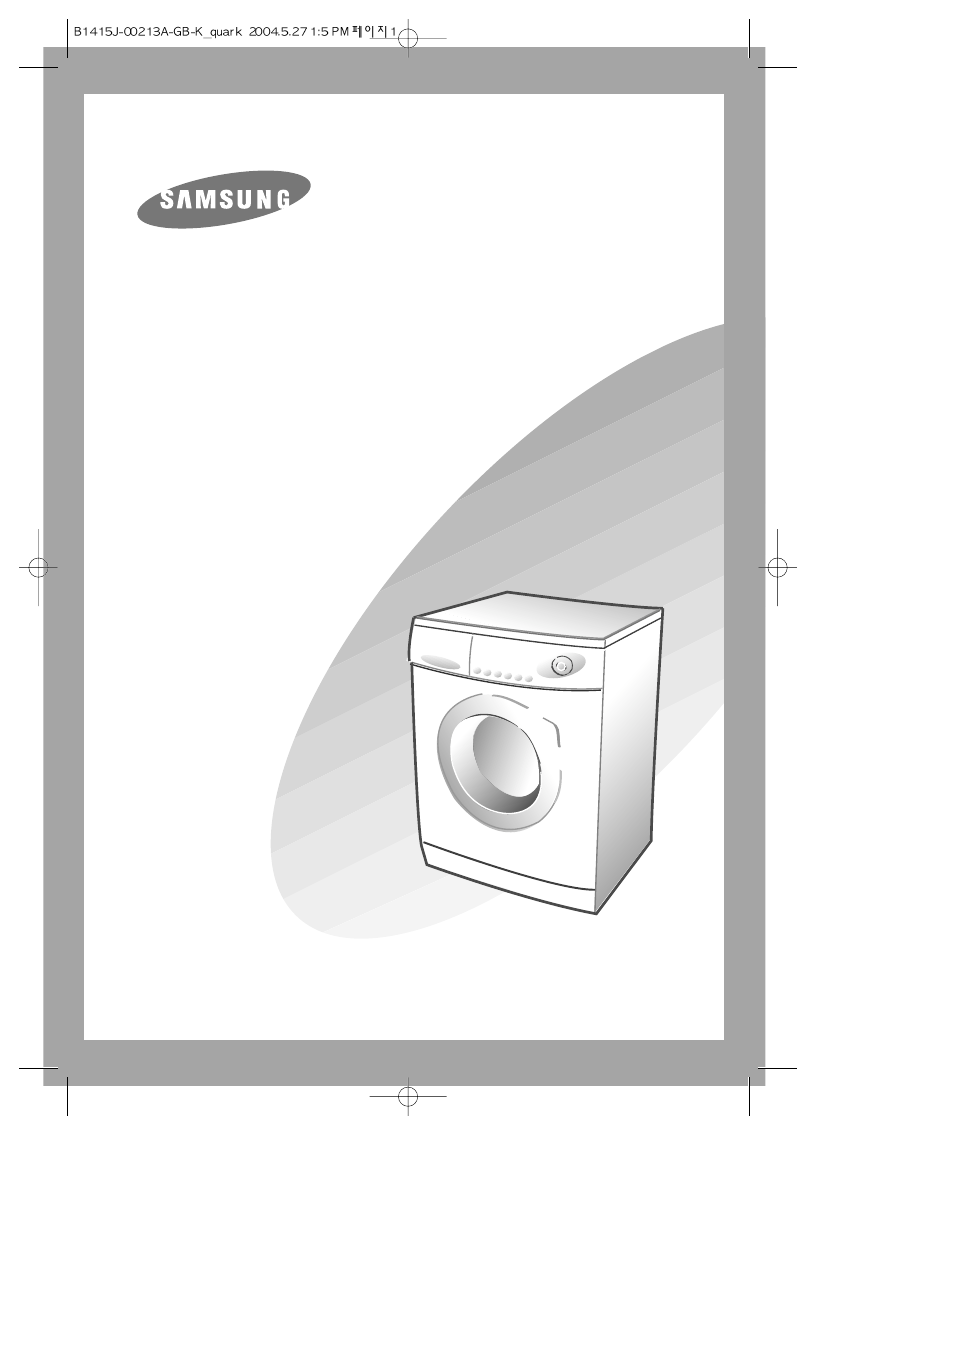 Samsung B1415J User Manual | 24 pages